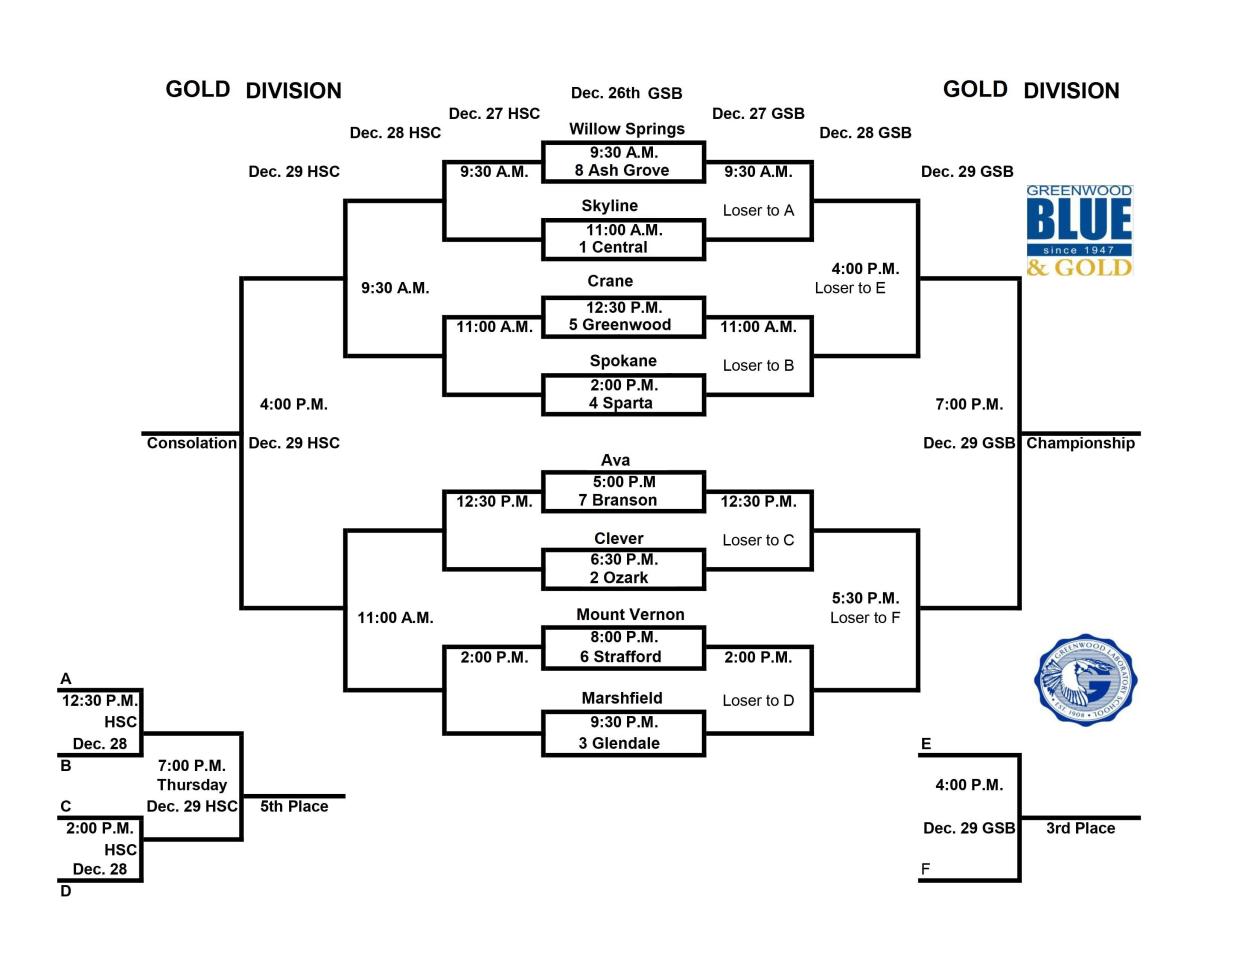 The Gold Division tournament bracket for the 2023 Blue and Gold Tournament.